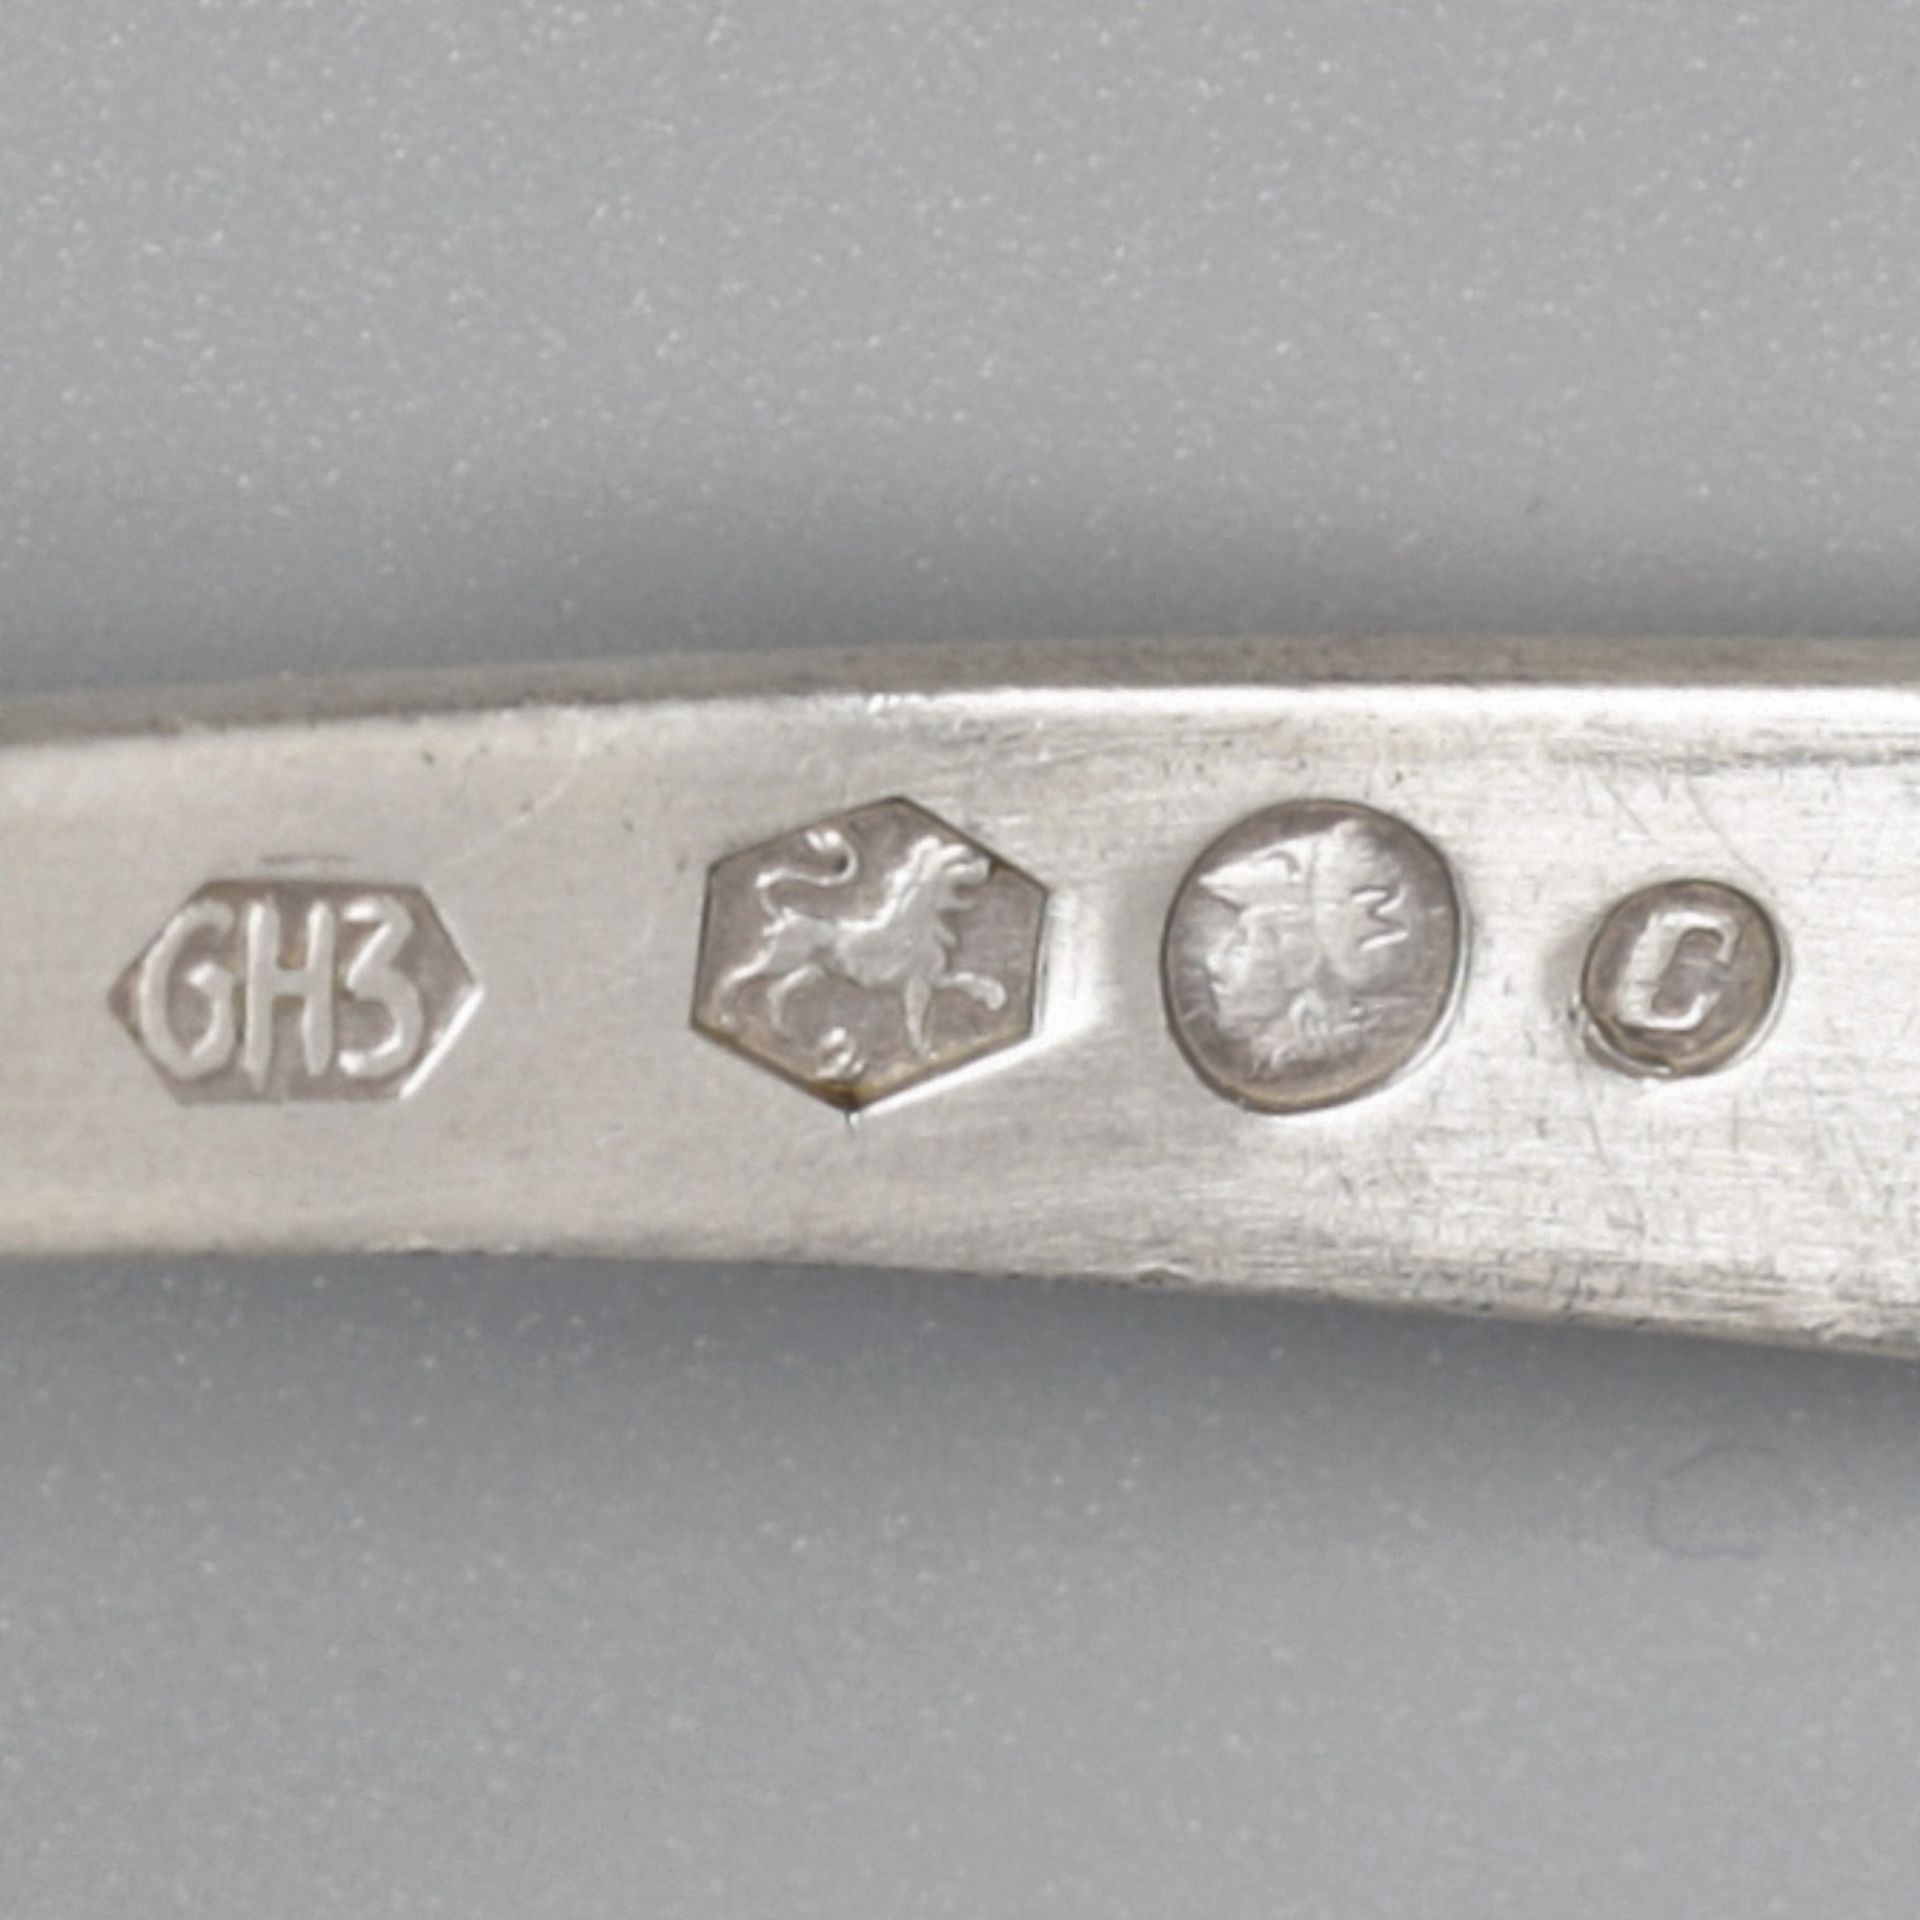 No reserve - Sauce serving spoon "Haags Lofje" silver. - Image 5 of 5